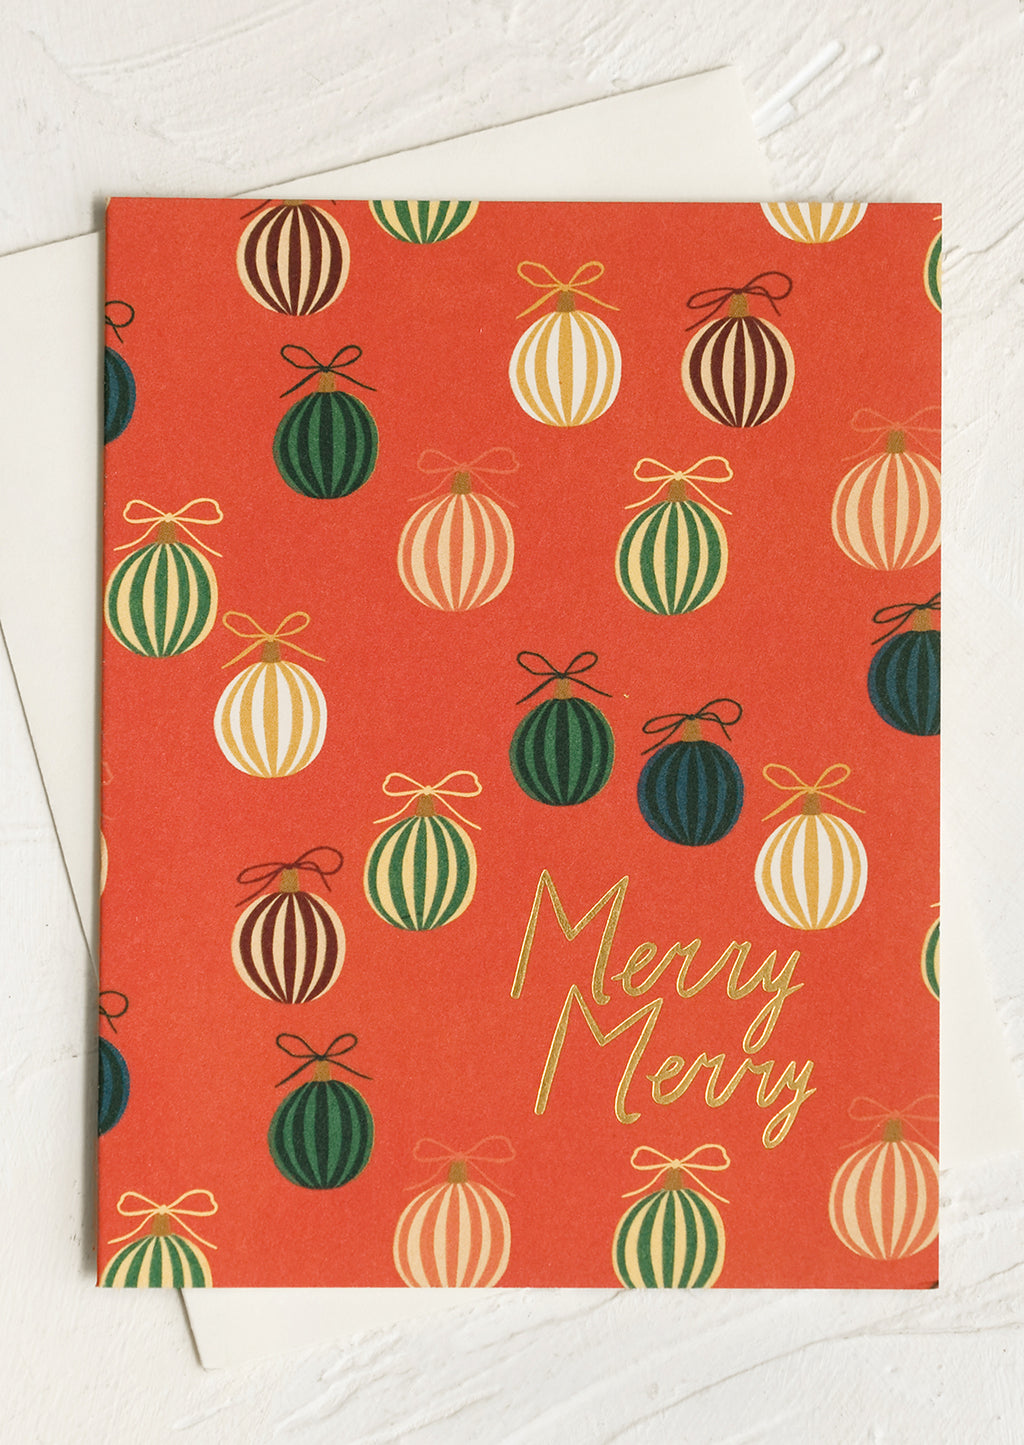 2: A set of red greeting cards with green ornament print, gold lettering reads "merry merry".